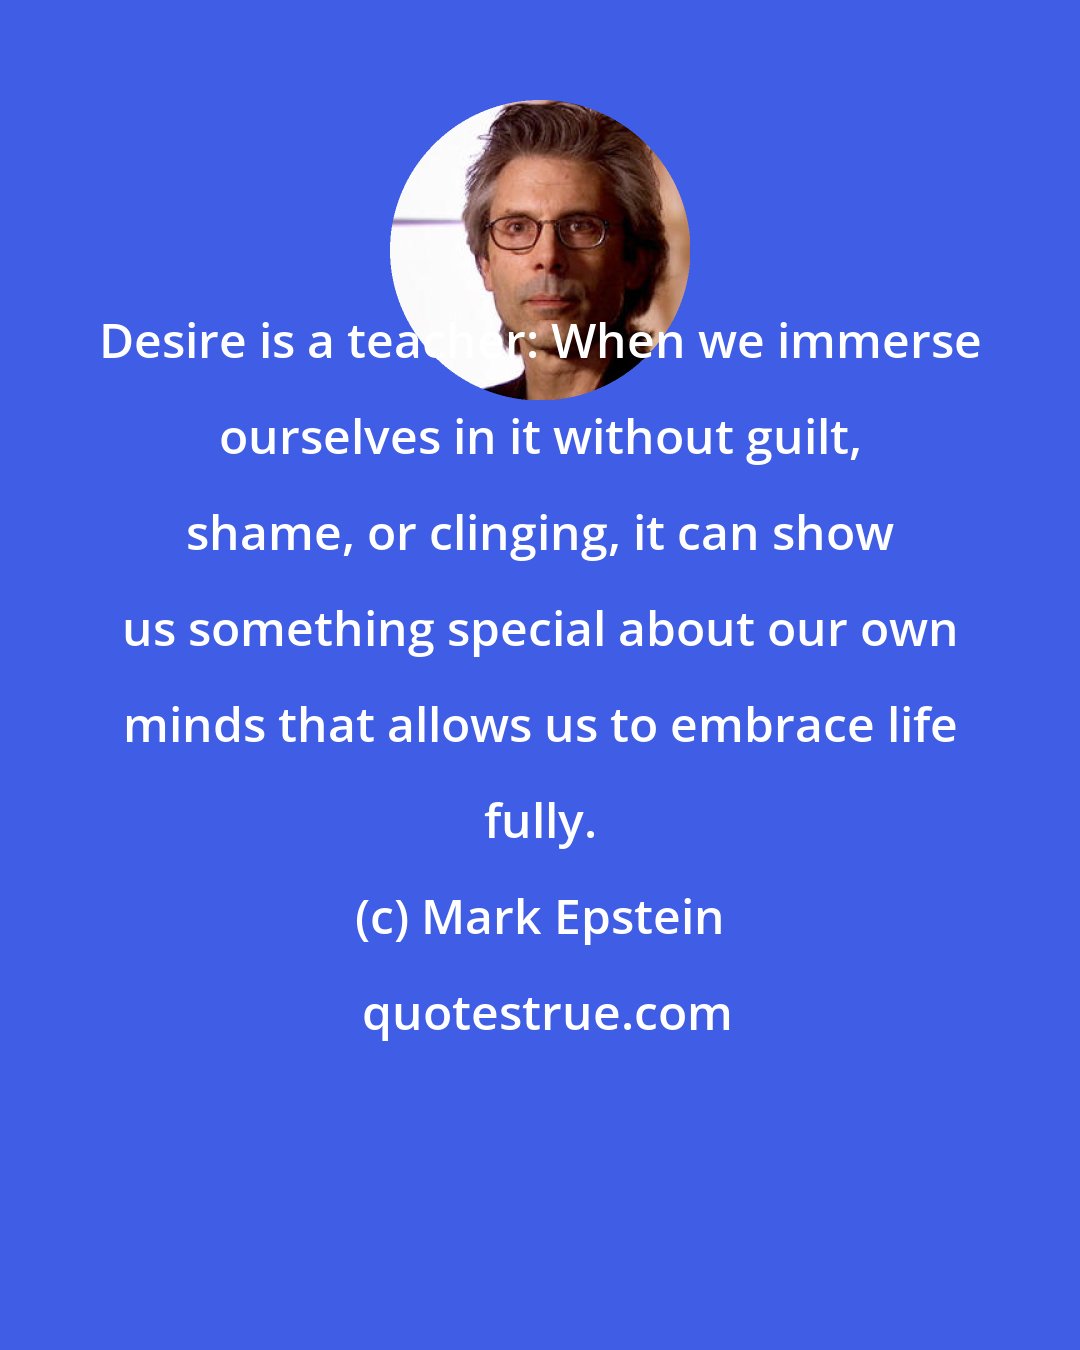 Mark Epstein: Desire is a teacher: When we immerse ourselves in it without guilt, shame, or clinging, it can show us something special about our own minds that allows us to embrace life fully.